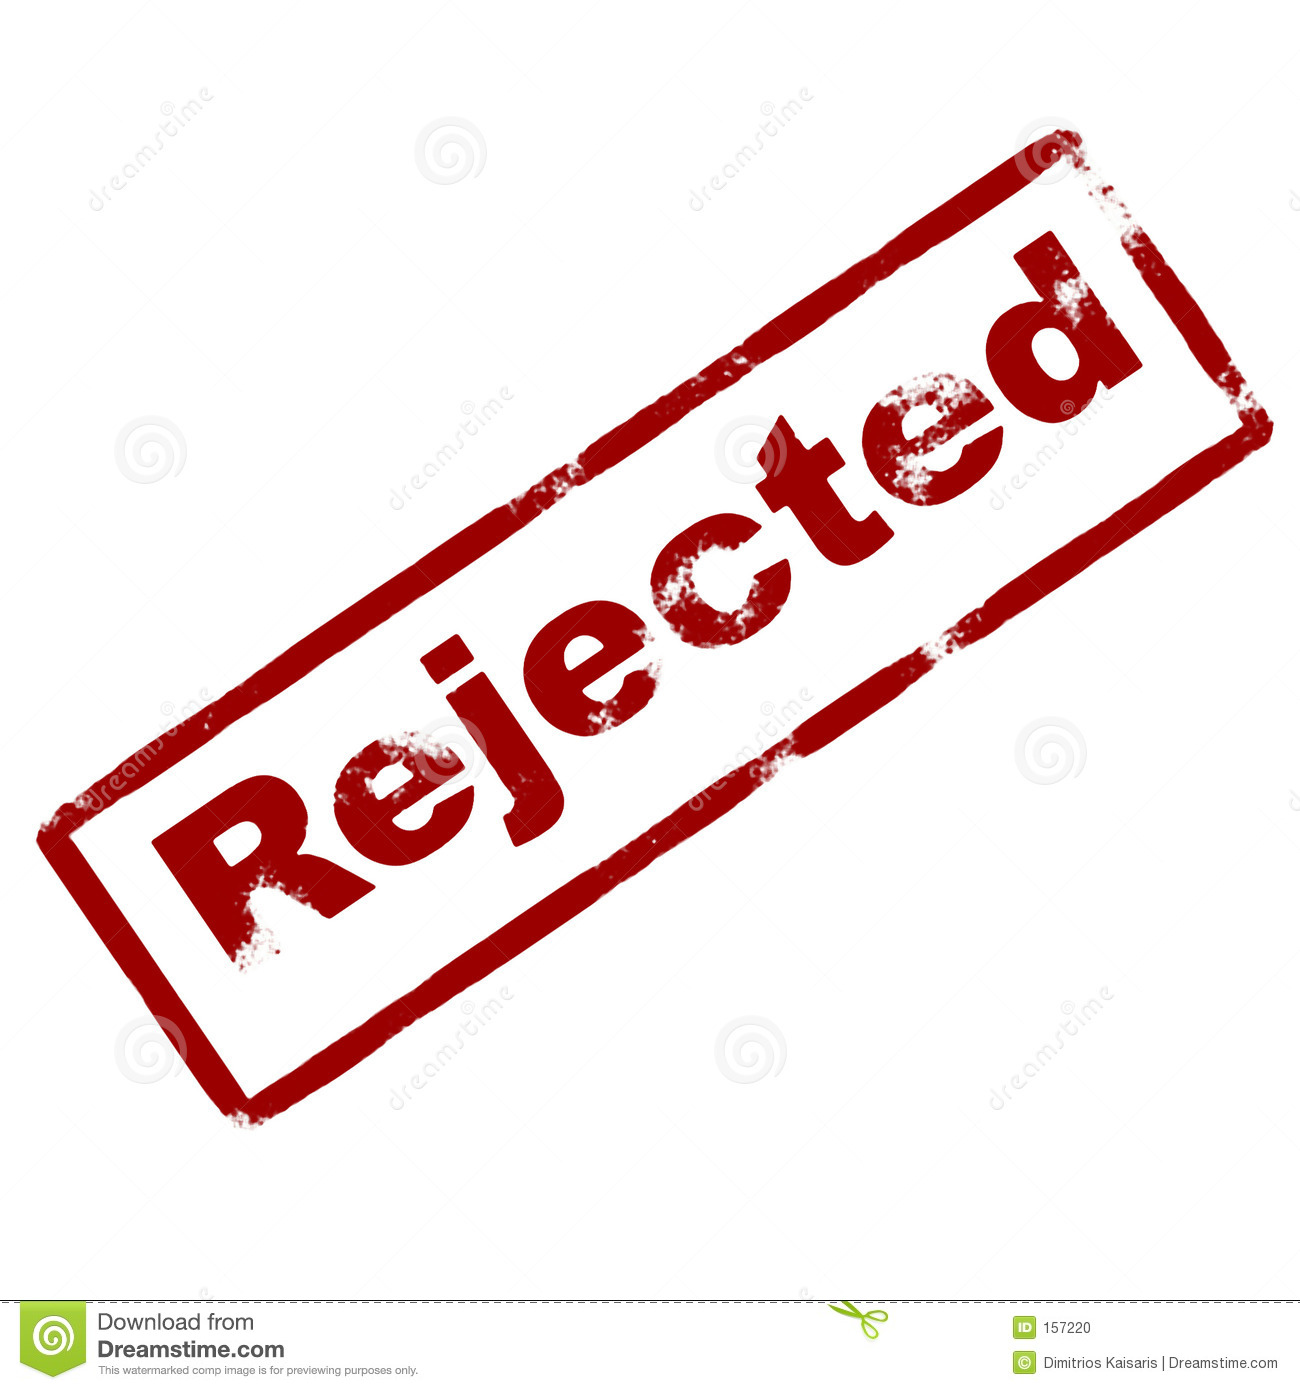 Rejected Rubber Ink Stamp Stock Photo   Image  157220